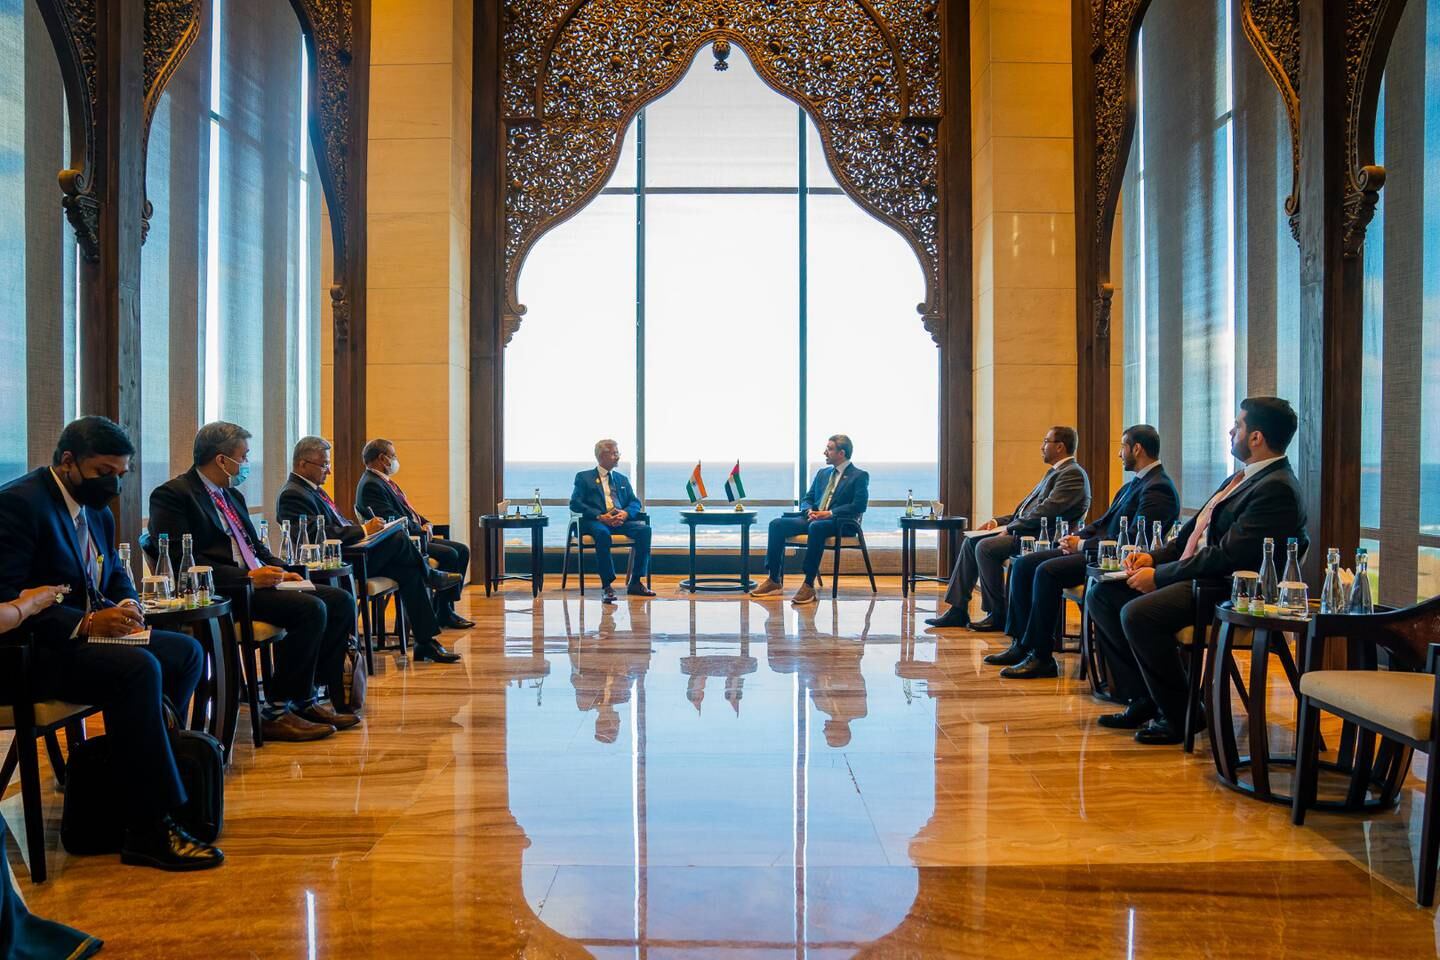 Sheikh Abdullah, Minister of Foreign Affairs and International Co-operation, wished India further progress, development and prosperity during a G20 meeting in Bali, Indonesia. Photo: Wam